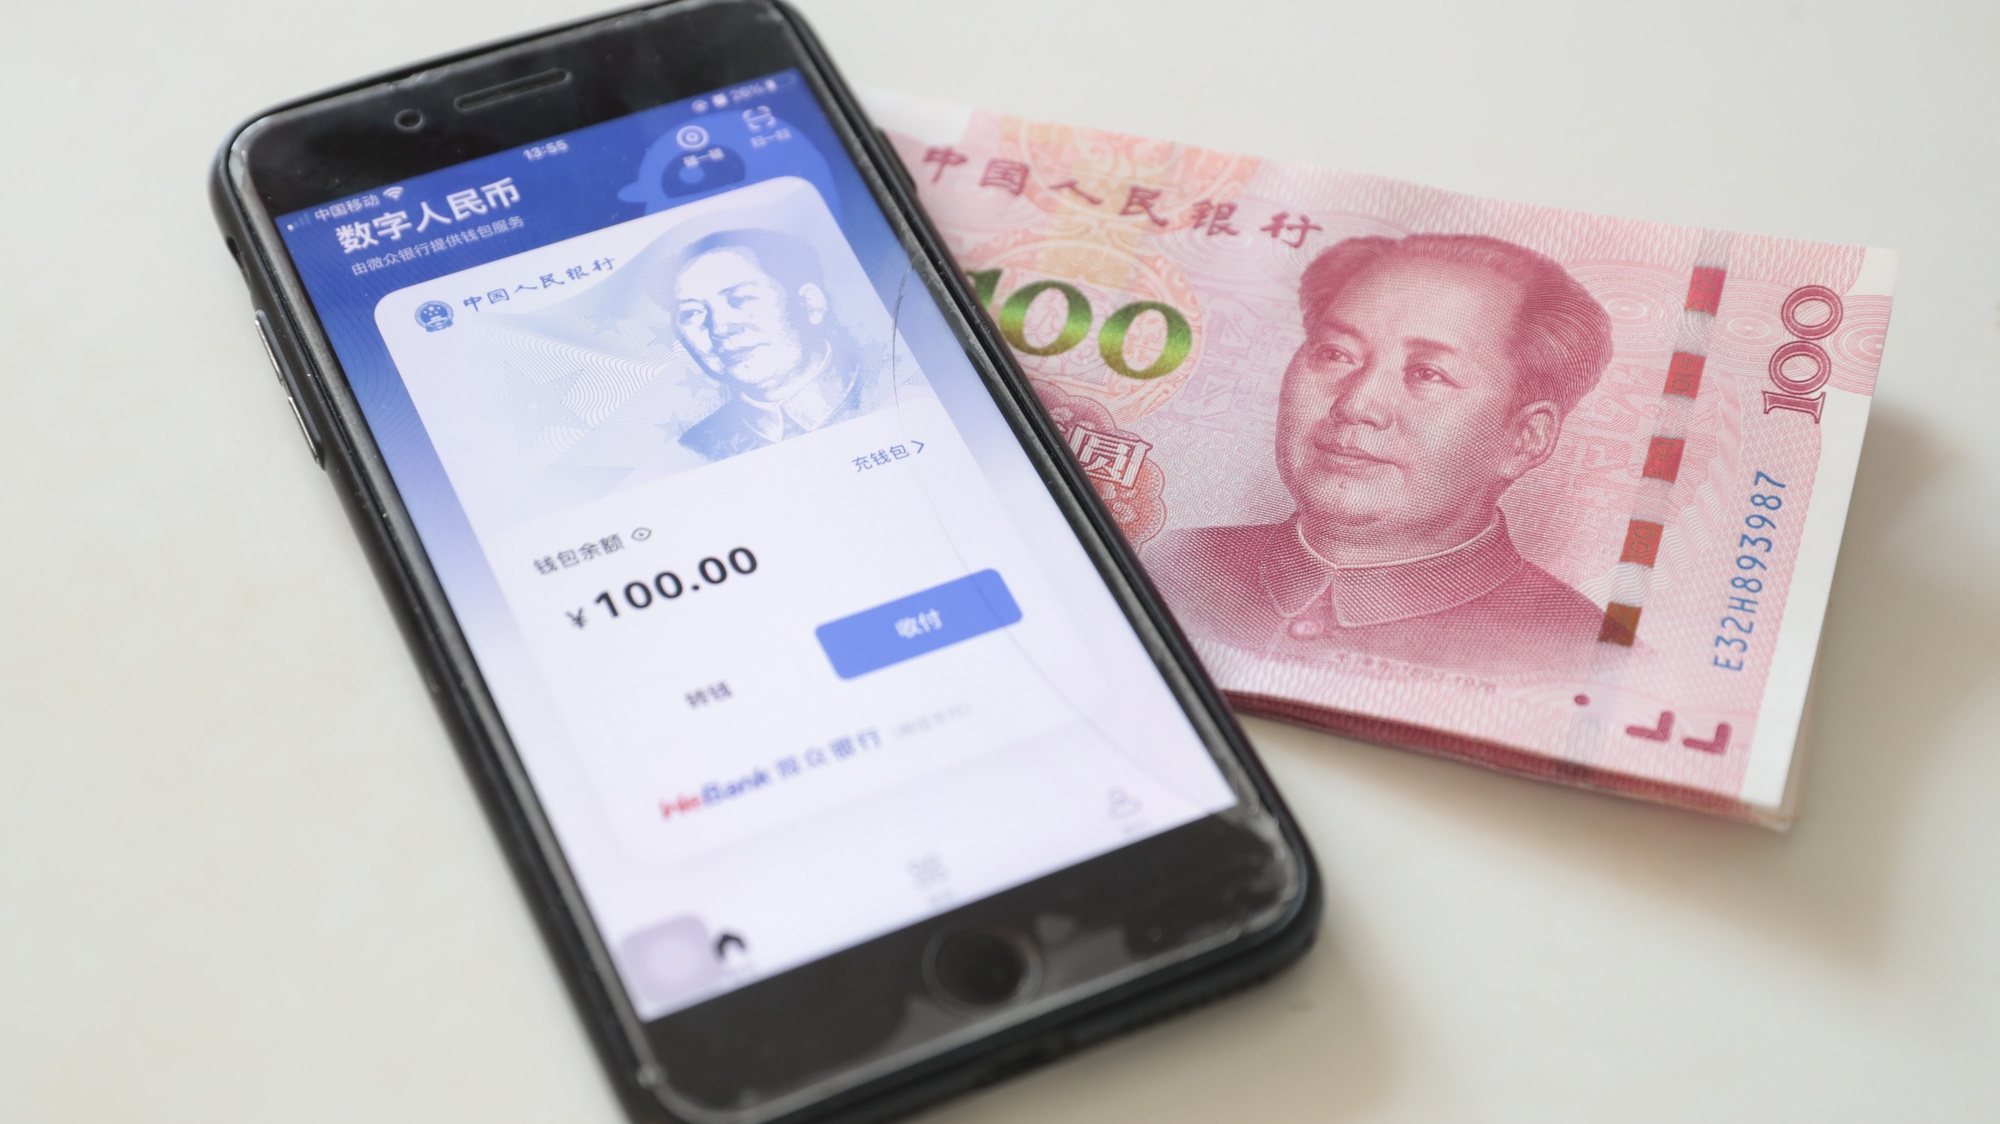 epa09669043 A view shows e-CNY digital wallet on a mobile phone beside Chinese paper currency, in Beijing, China, 06 January 2022. China has launched a smartphone app for making payments and transfers with the digital yuan the e-CNY app became available on app distribution platforms for Android and iOS users in China on 04 January 2022.  EPA/WU HONG